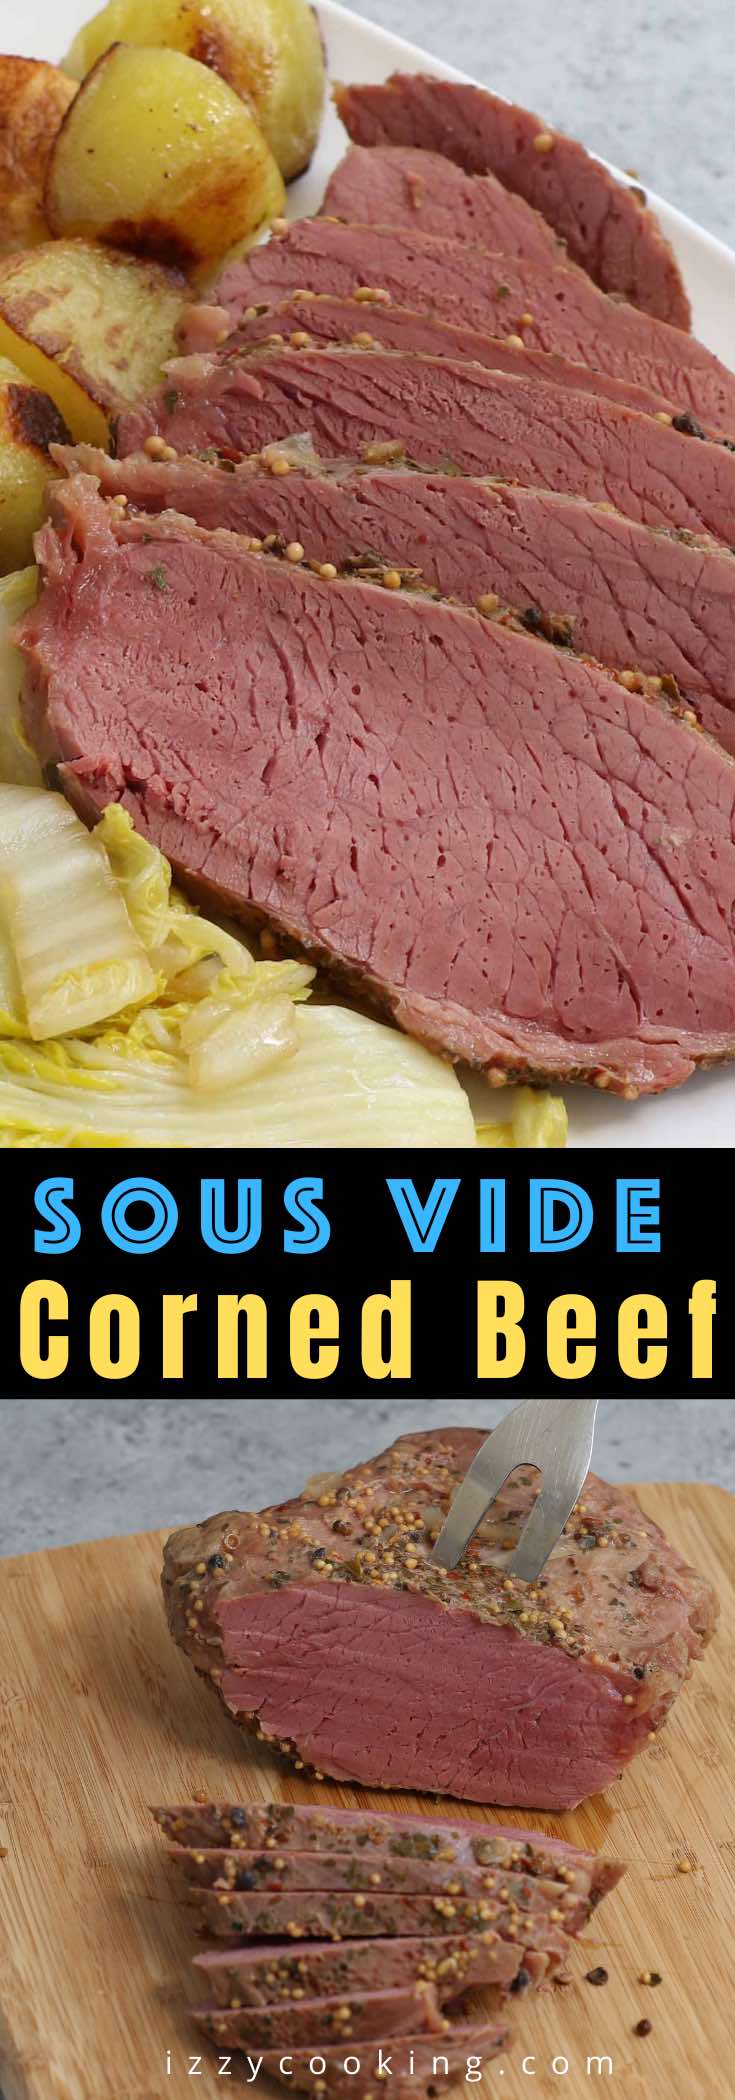 Sous Vide Corned Beef is perfectly tender and full of flavor. The salt-cured corned beef brisket is rubbed with pickling spice, and cooked low and slow in a water bath at 175°F degrees. This Irish staple is sure to be the star of your St. Patrick’s Day feast! Serve it with cabbage or make a warm, cheesy Reuben sandwich. 